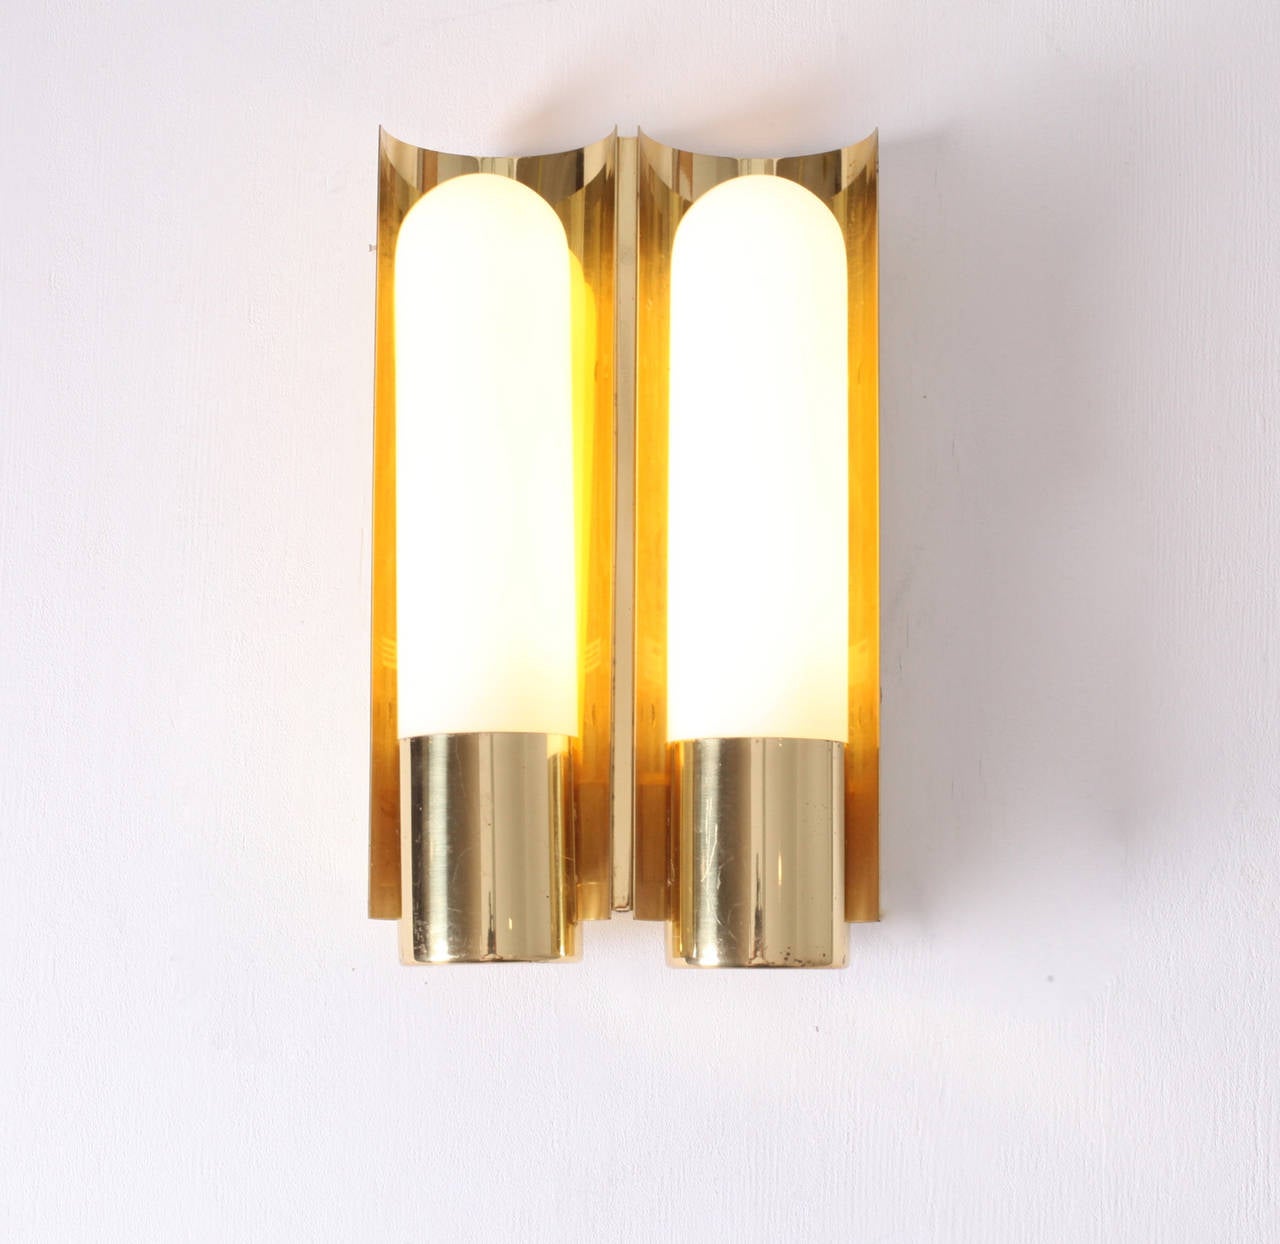 Beautiful  glass and brass wall lights. We have another Listing with a pair of the single version of this model. 2xL11W/42
To be on the the safe side, the lamp should be checked locally by a specialist concerning local requirements.
